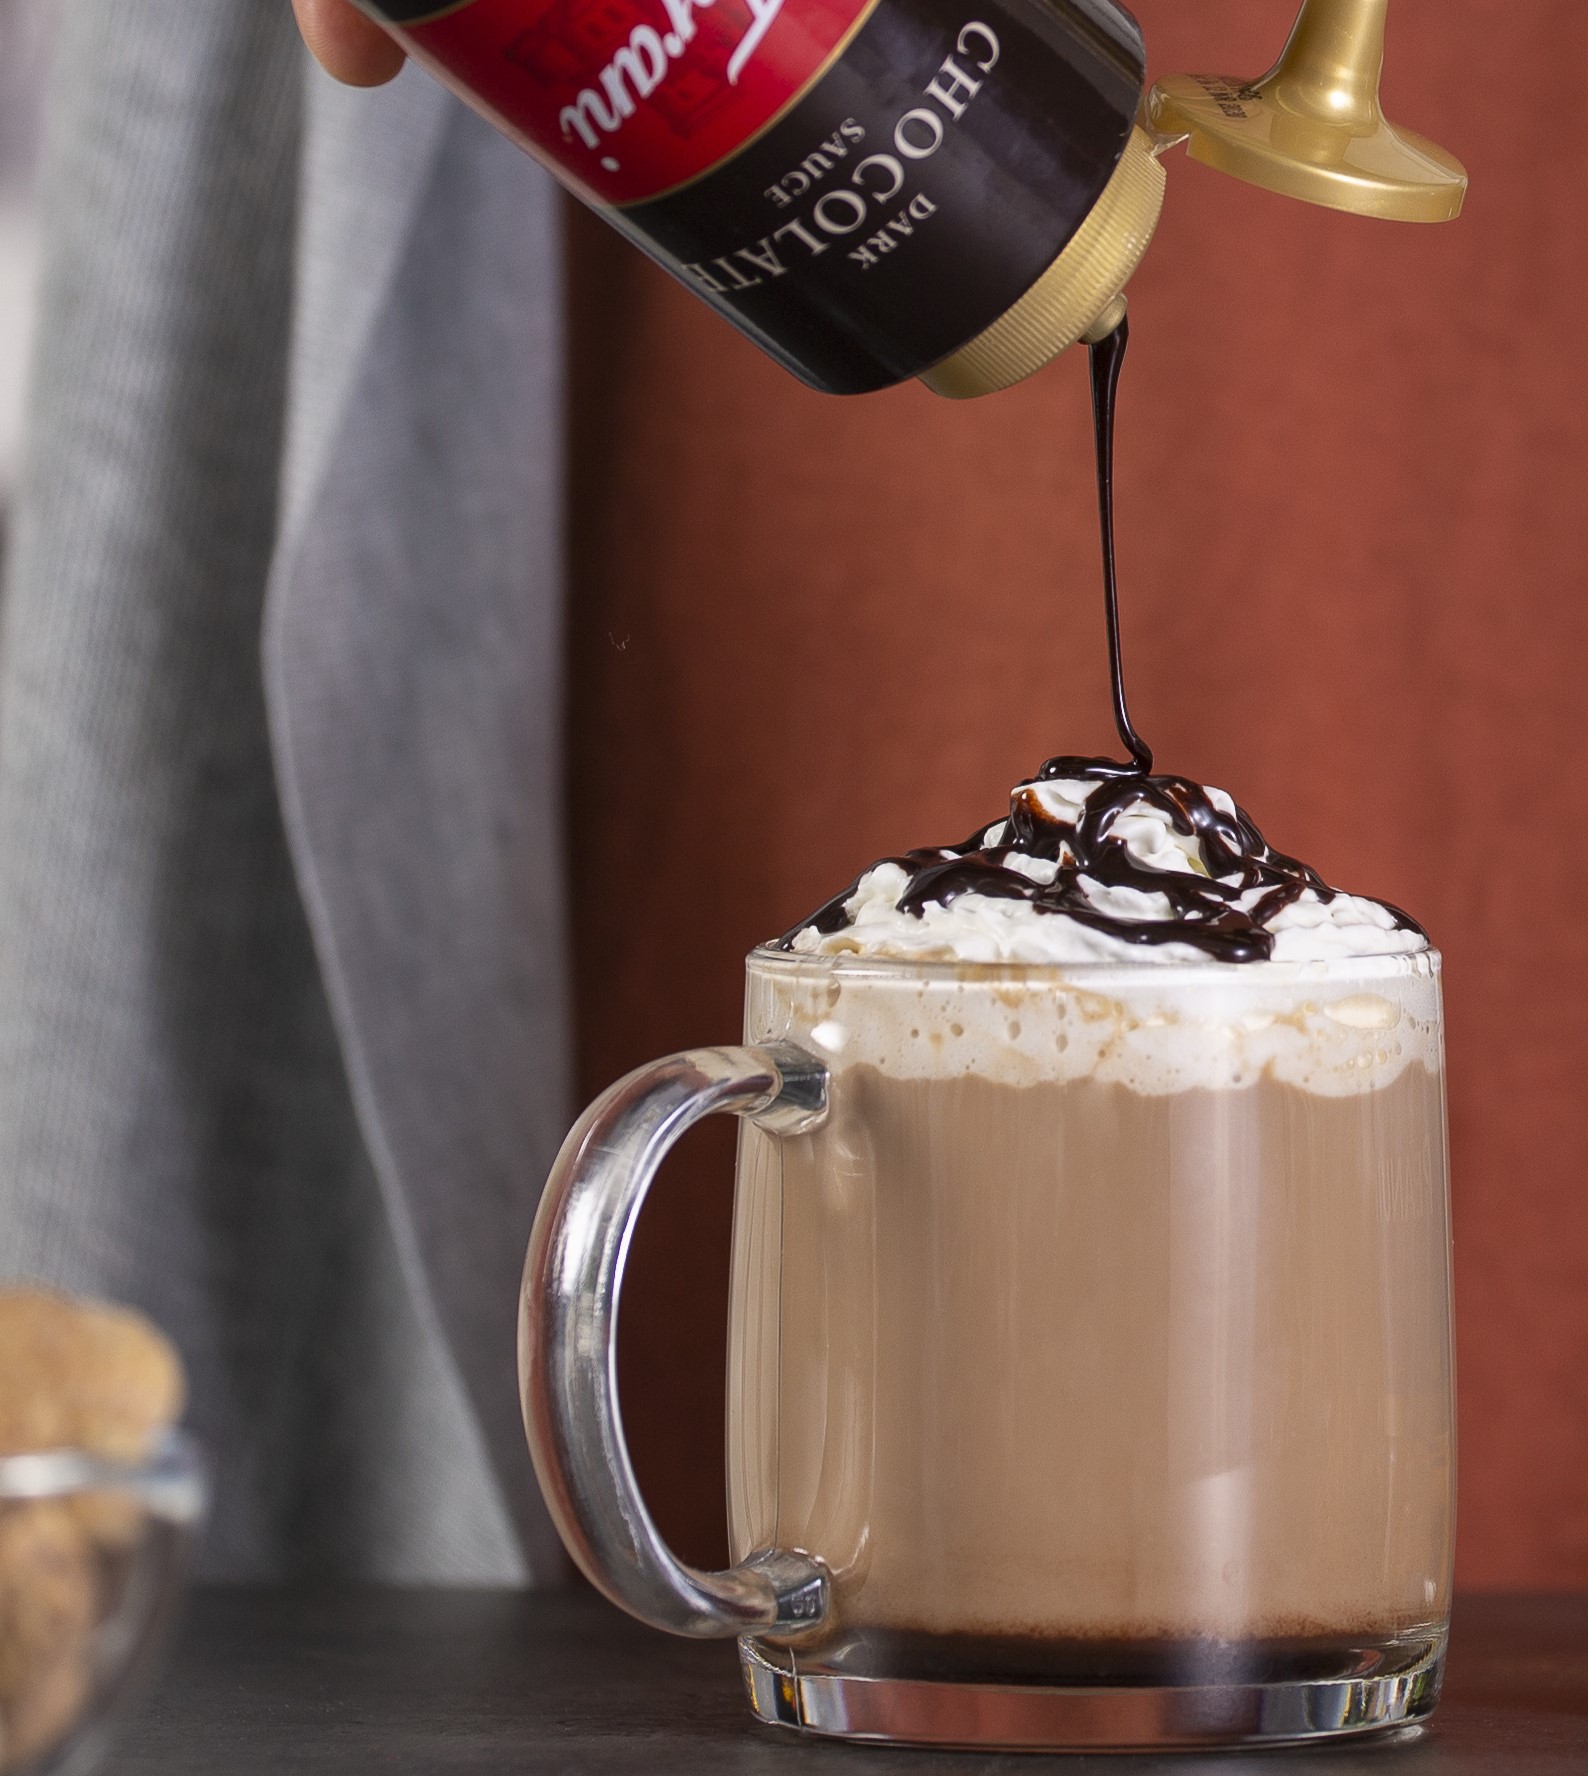 Torani Dark Chocolate Sauce drizzling over a hot chocolate with whipped cream.